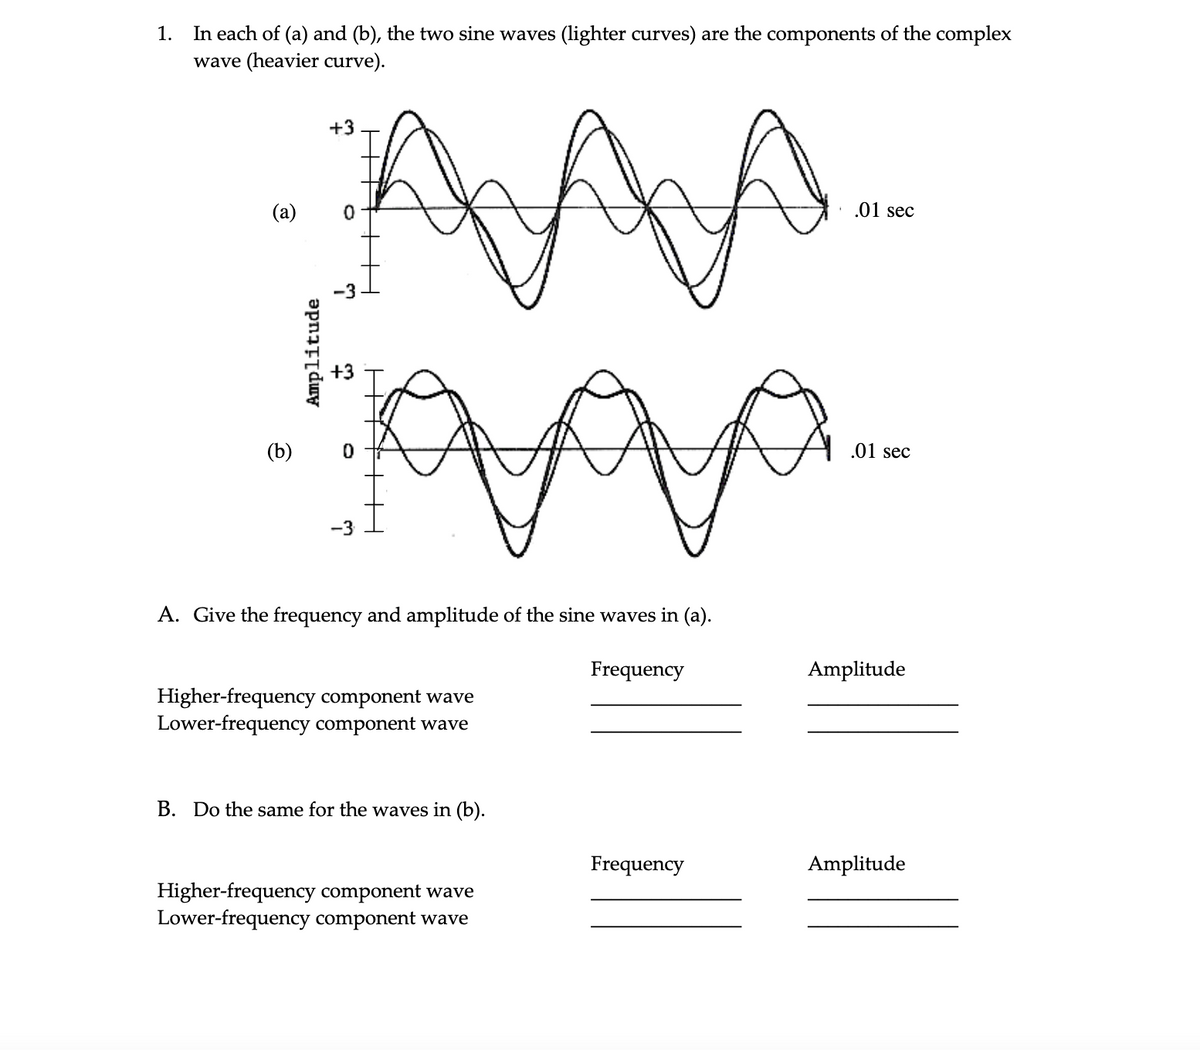 1. In each of (a) and (b), the two sine waves (lighter curves) are the components of the complex
wave (heavier curve).
(a)
(b)
AAA-
+3
-3
Amplitude
+5
0
-3
H
A. Give the frequency and amplitude of the sine waves in (a).
Higher-frequency component wave
Lower-frequency component wave
B. Do the same for the waves in (b).
Higher-frequency component wave
Lower-frequency component wave
Frequency
Frequency
.01 sec
.01 sec
Amplitude
Amplitude